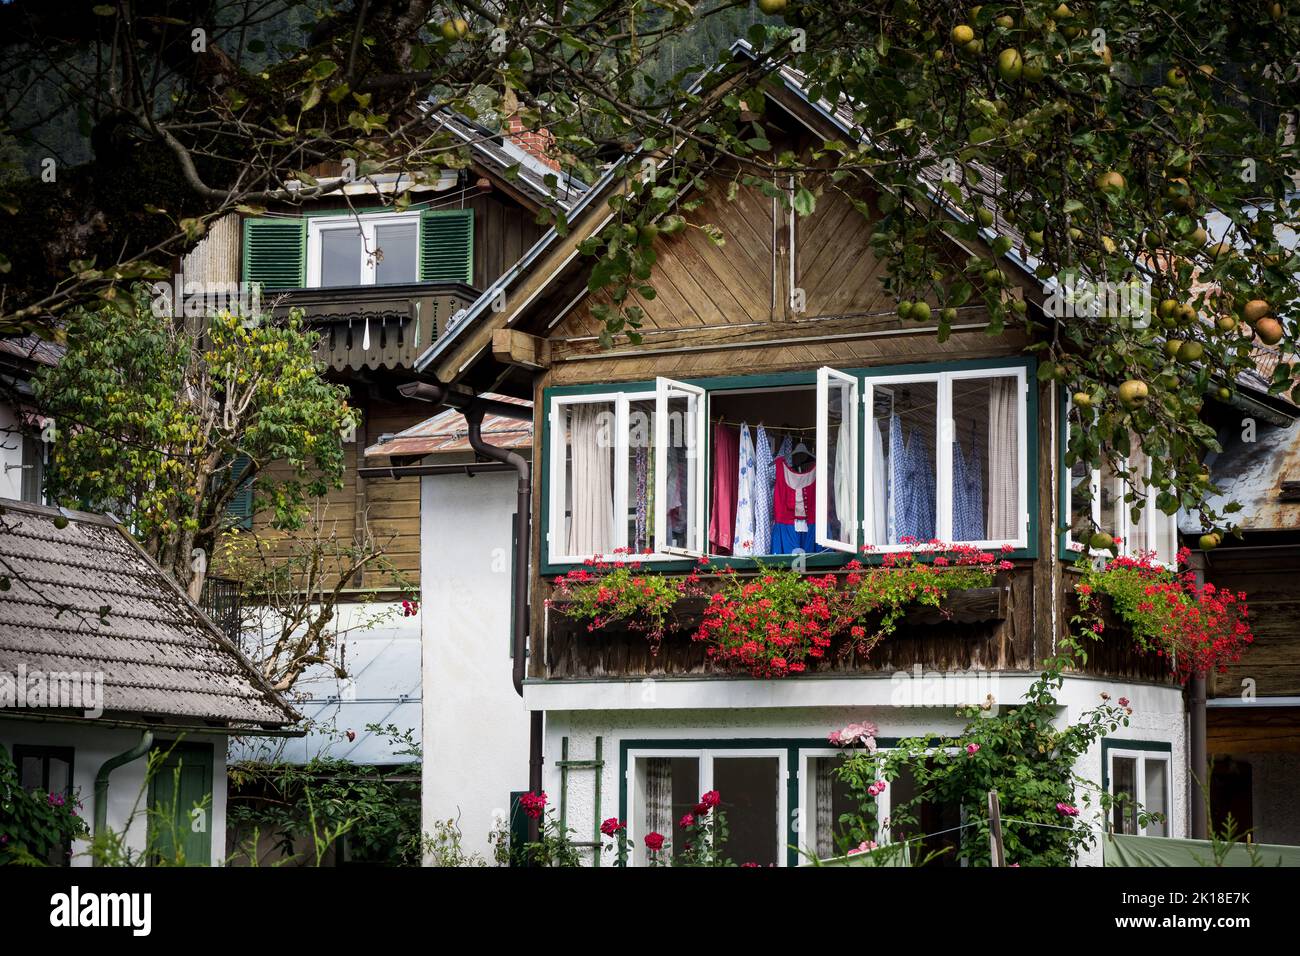 View of a typical historic townhouse in the center of Altaussee, Ausseer Land, Styria, Austria, with a traditional dirndl dress hung out to dry Stock Photo